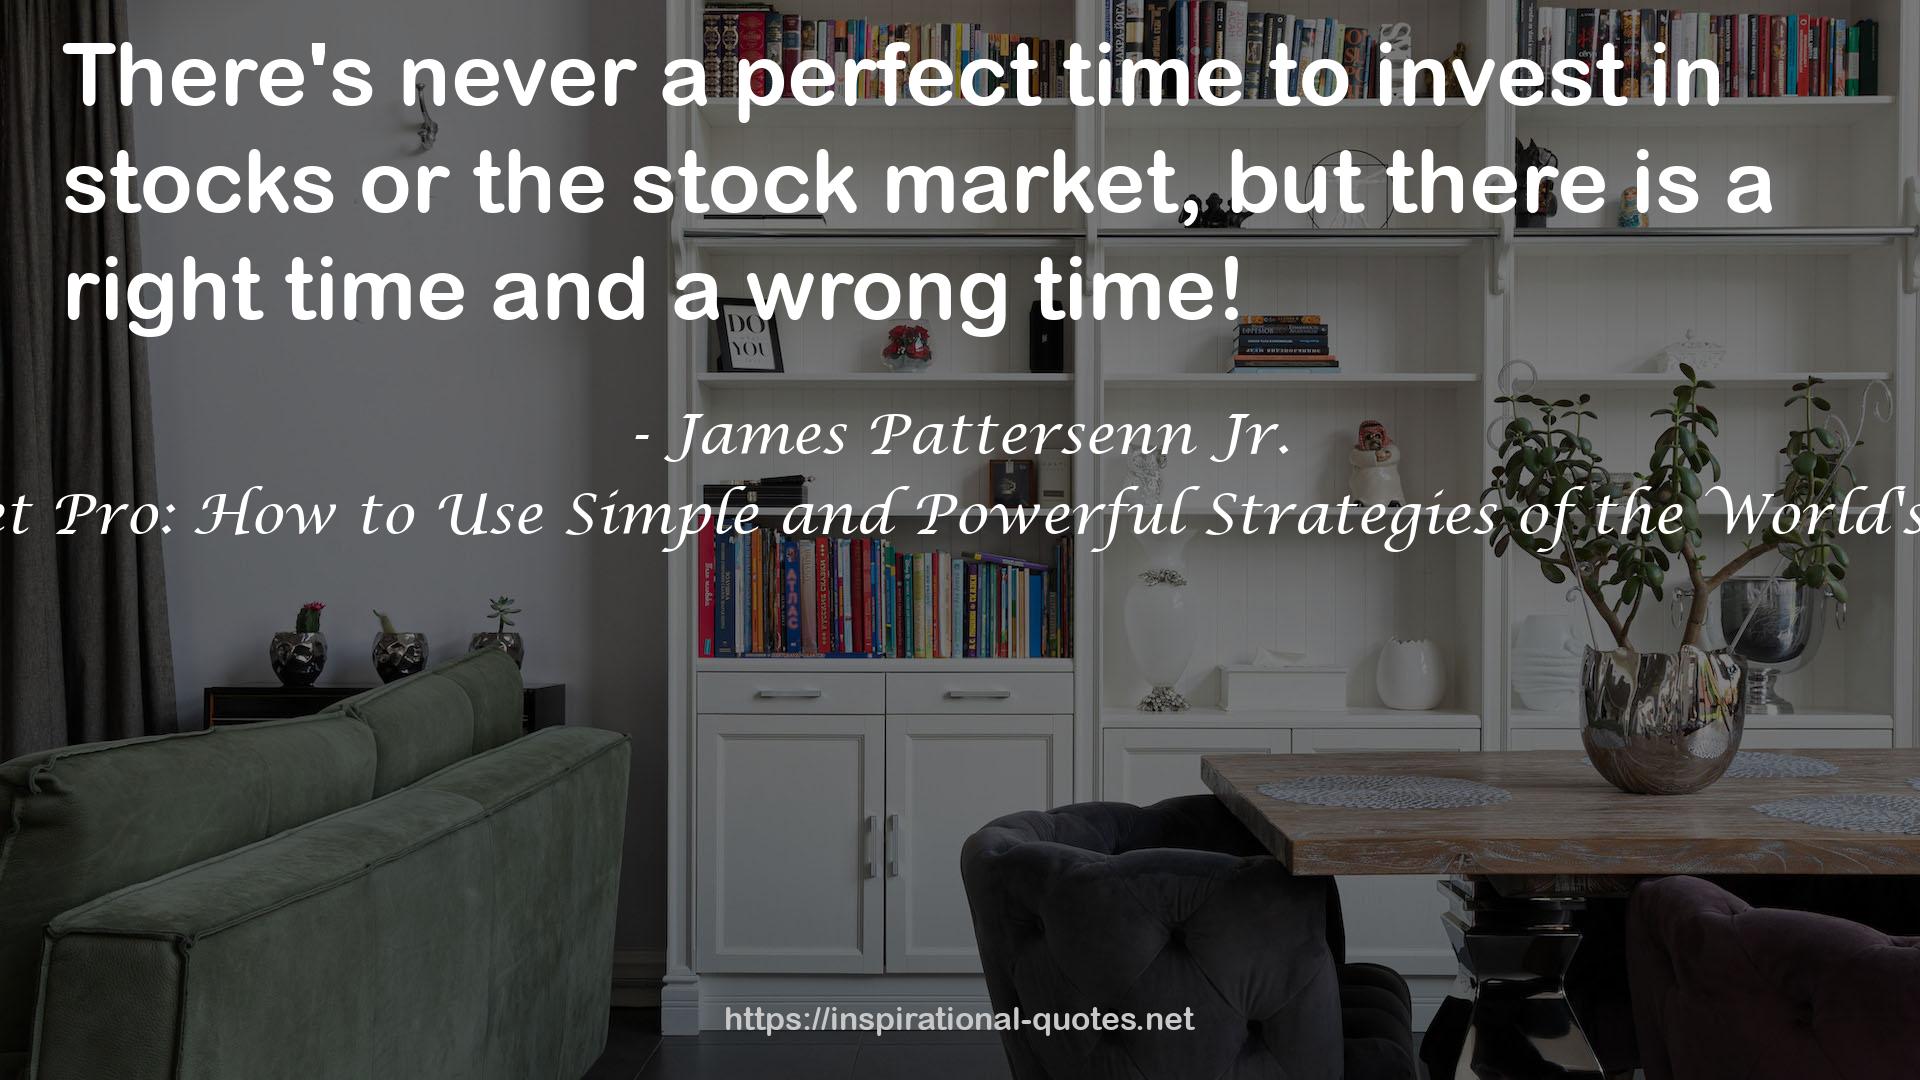 You Can Invest Like A Stock Market Pro: How to Use Simple and Powerful Strategies of the World's Greatest Investors to Build Wealth QUOTES